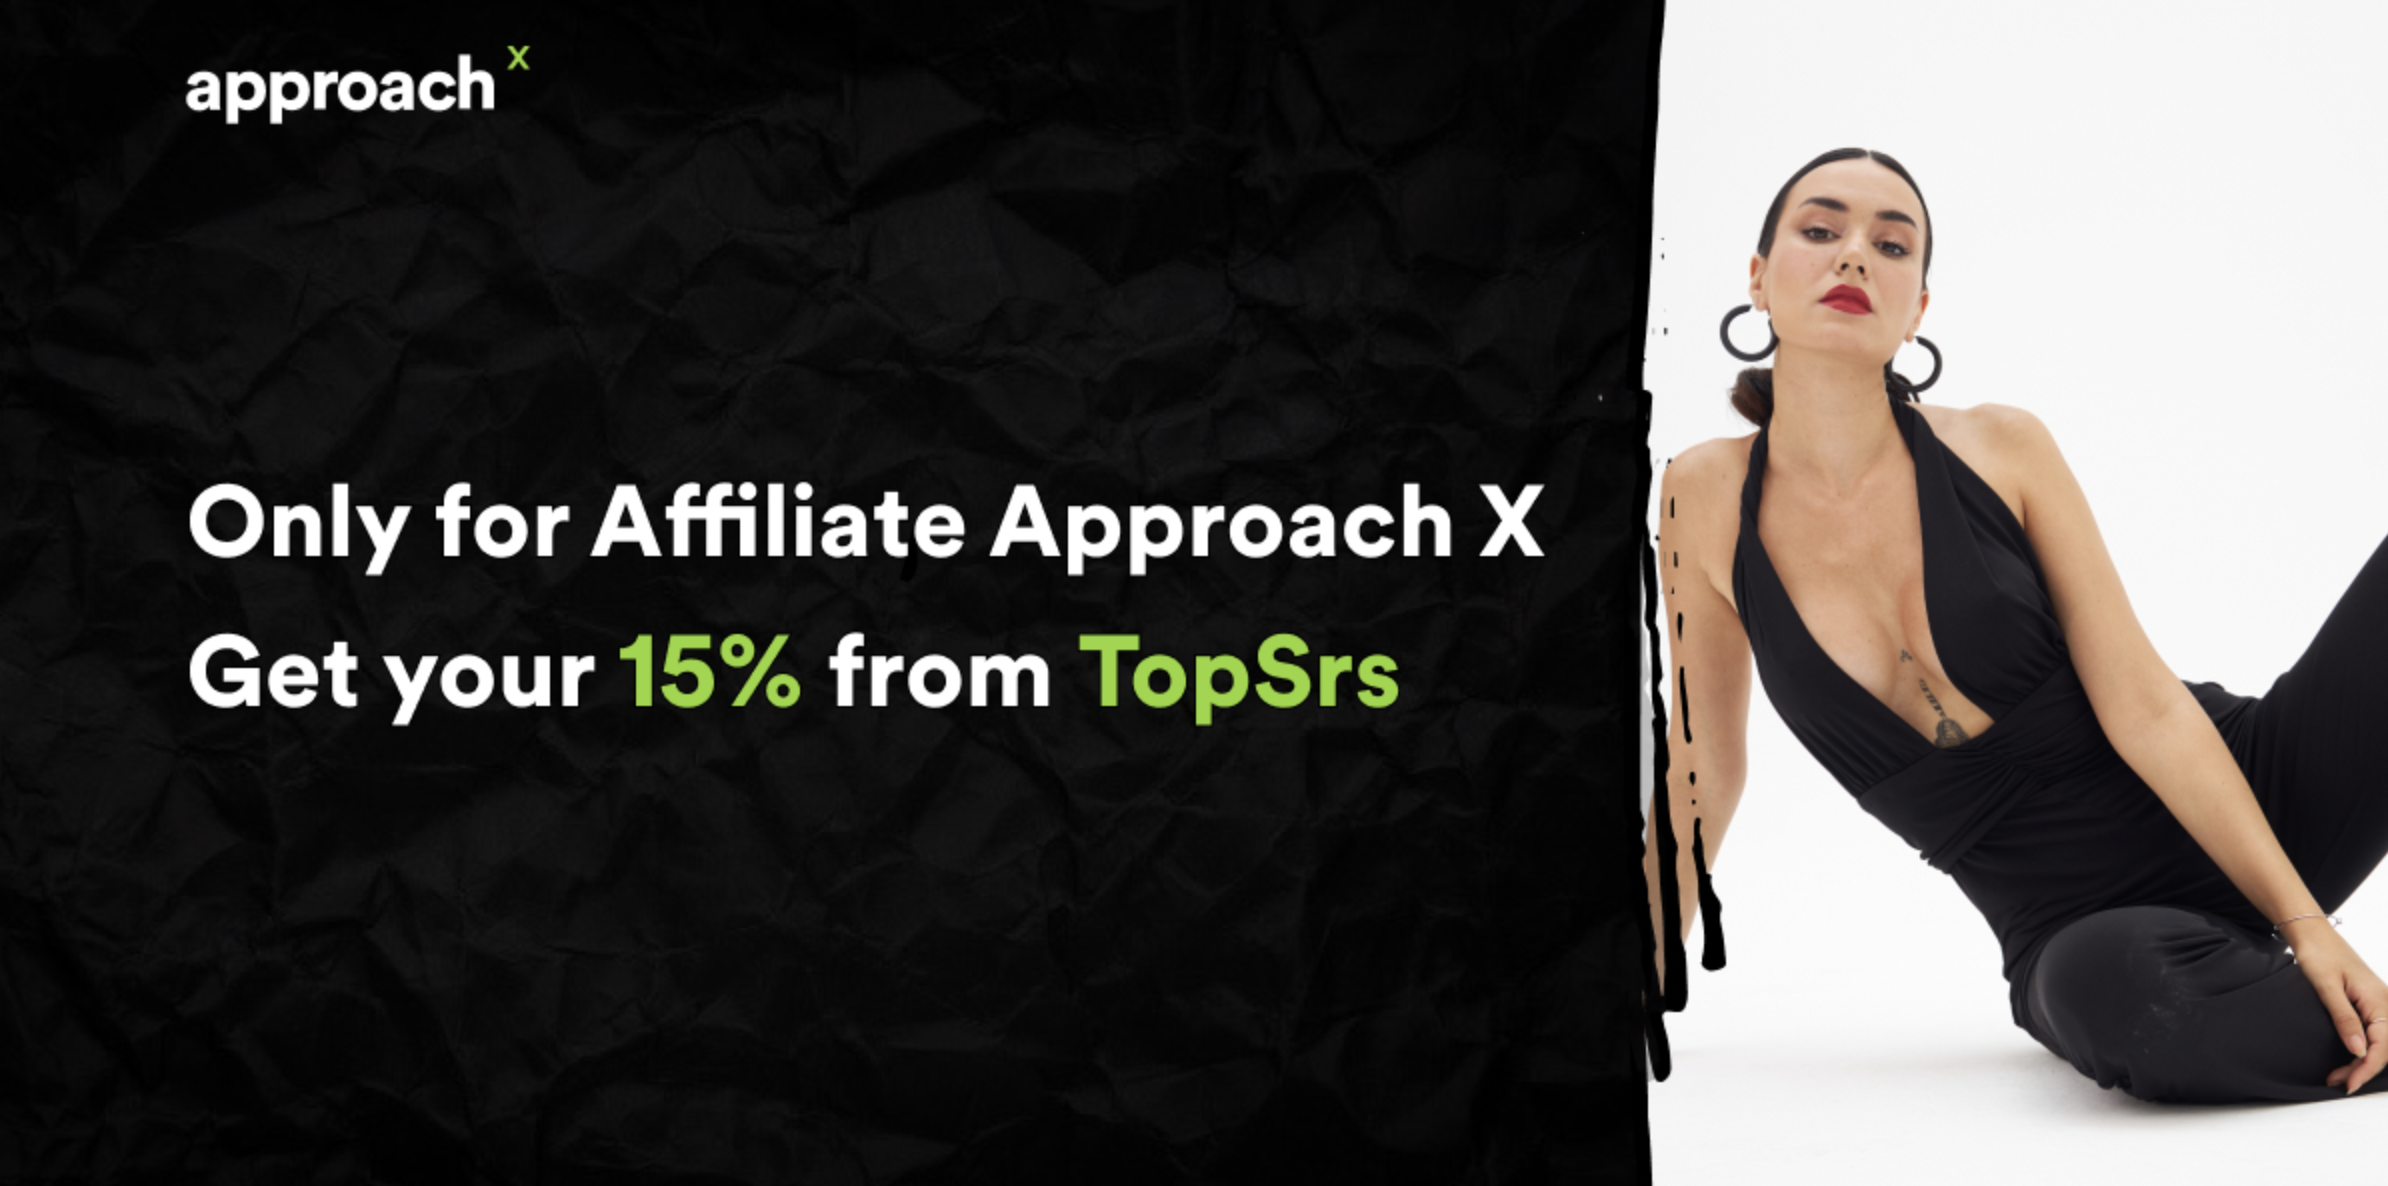 Get 15% from TopSRS